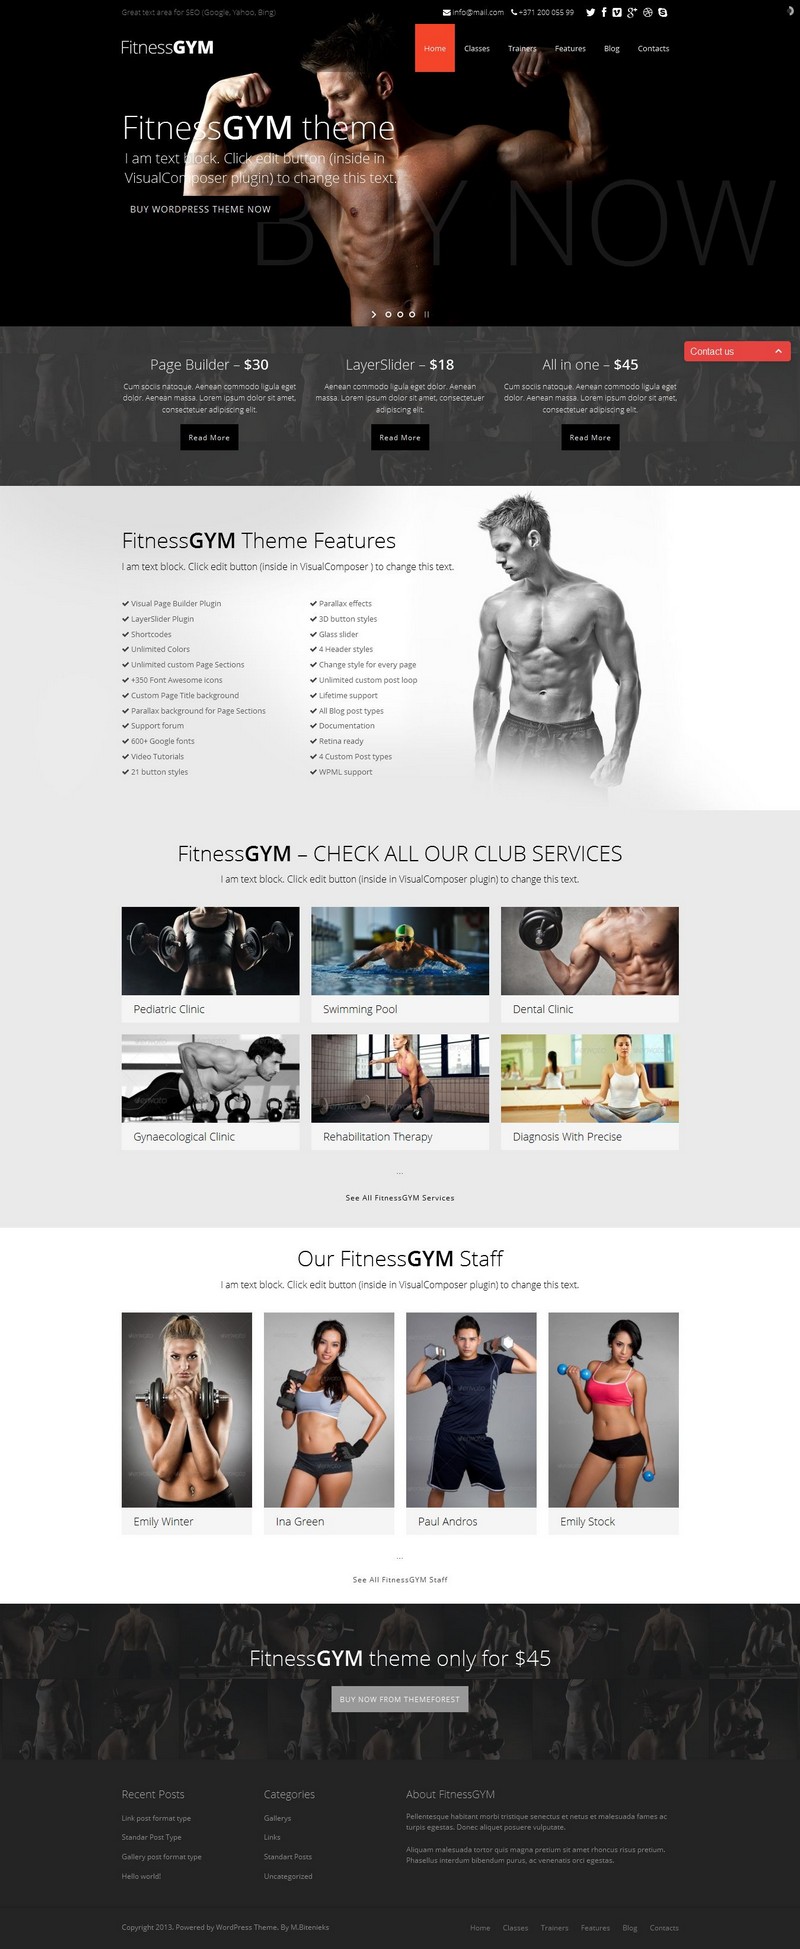 FitnessGYM